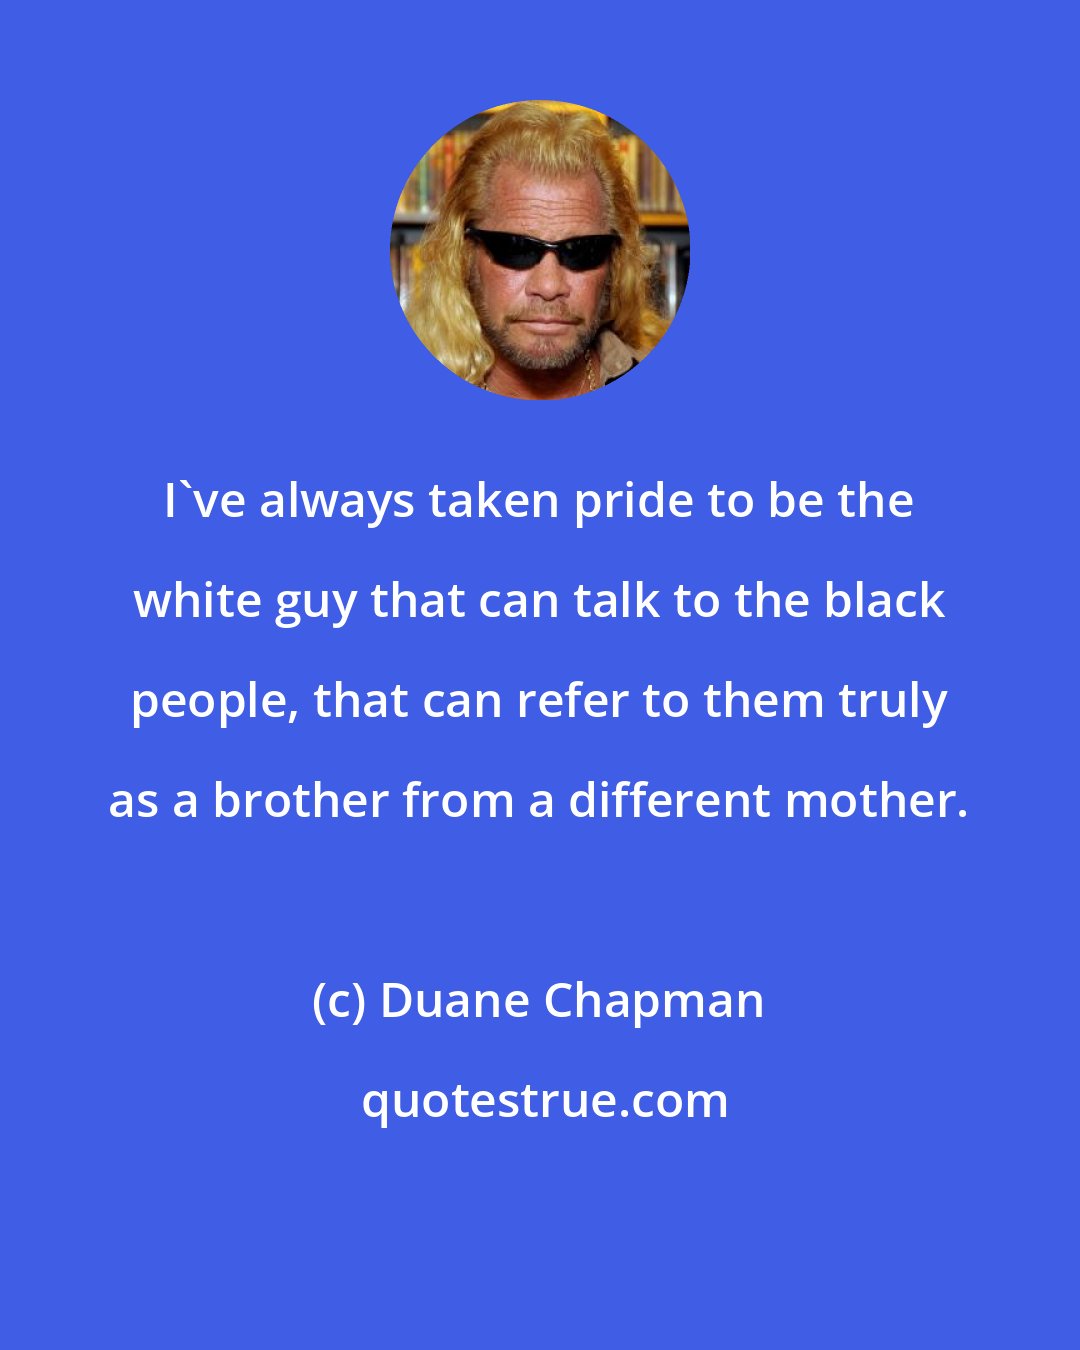 Duane Chapman: I've always taken pride to be the white guy that can talk to the black people, that can refer to them truly as a brother from a different mother.